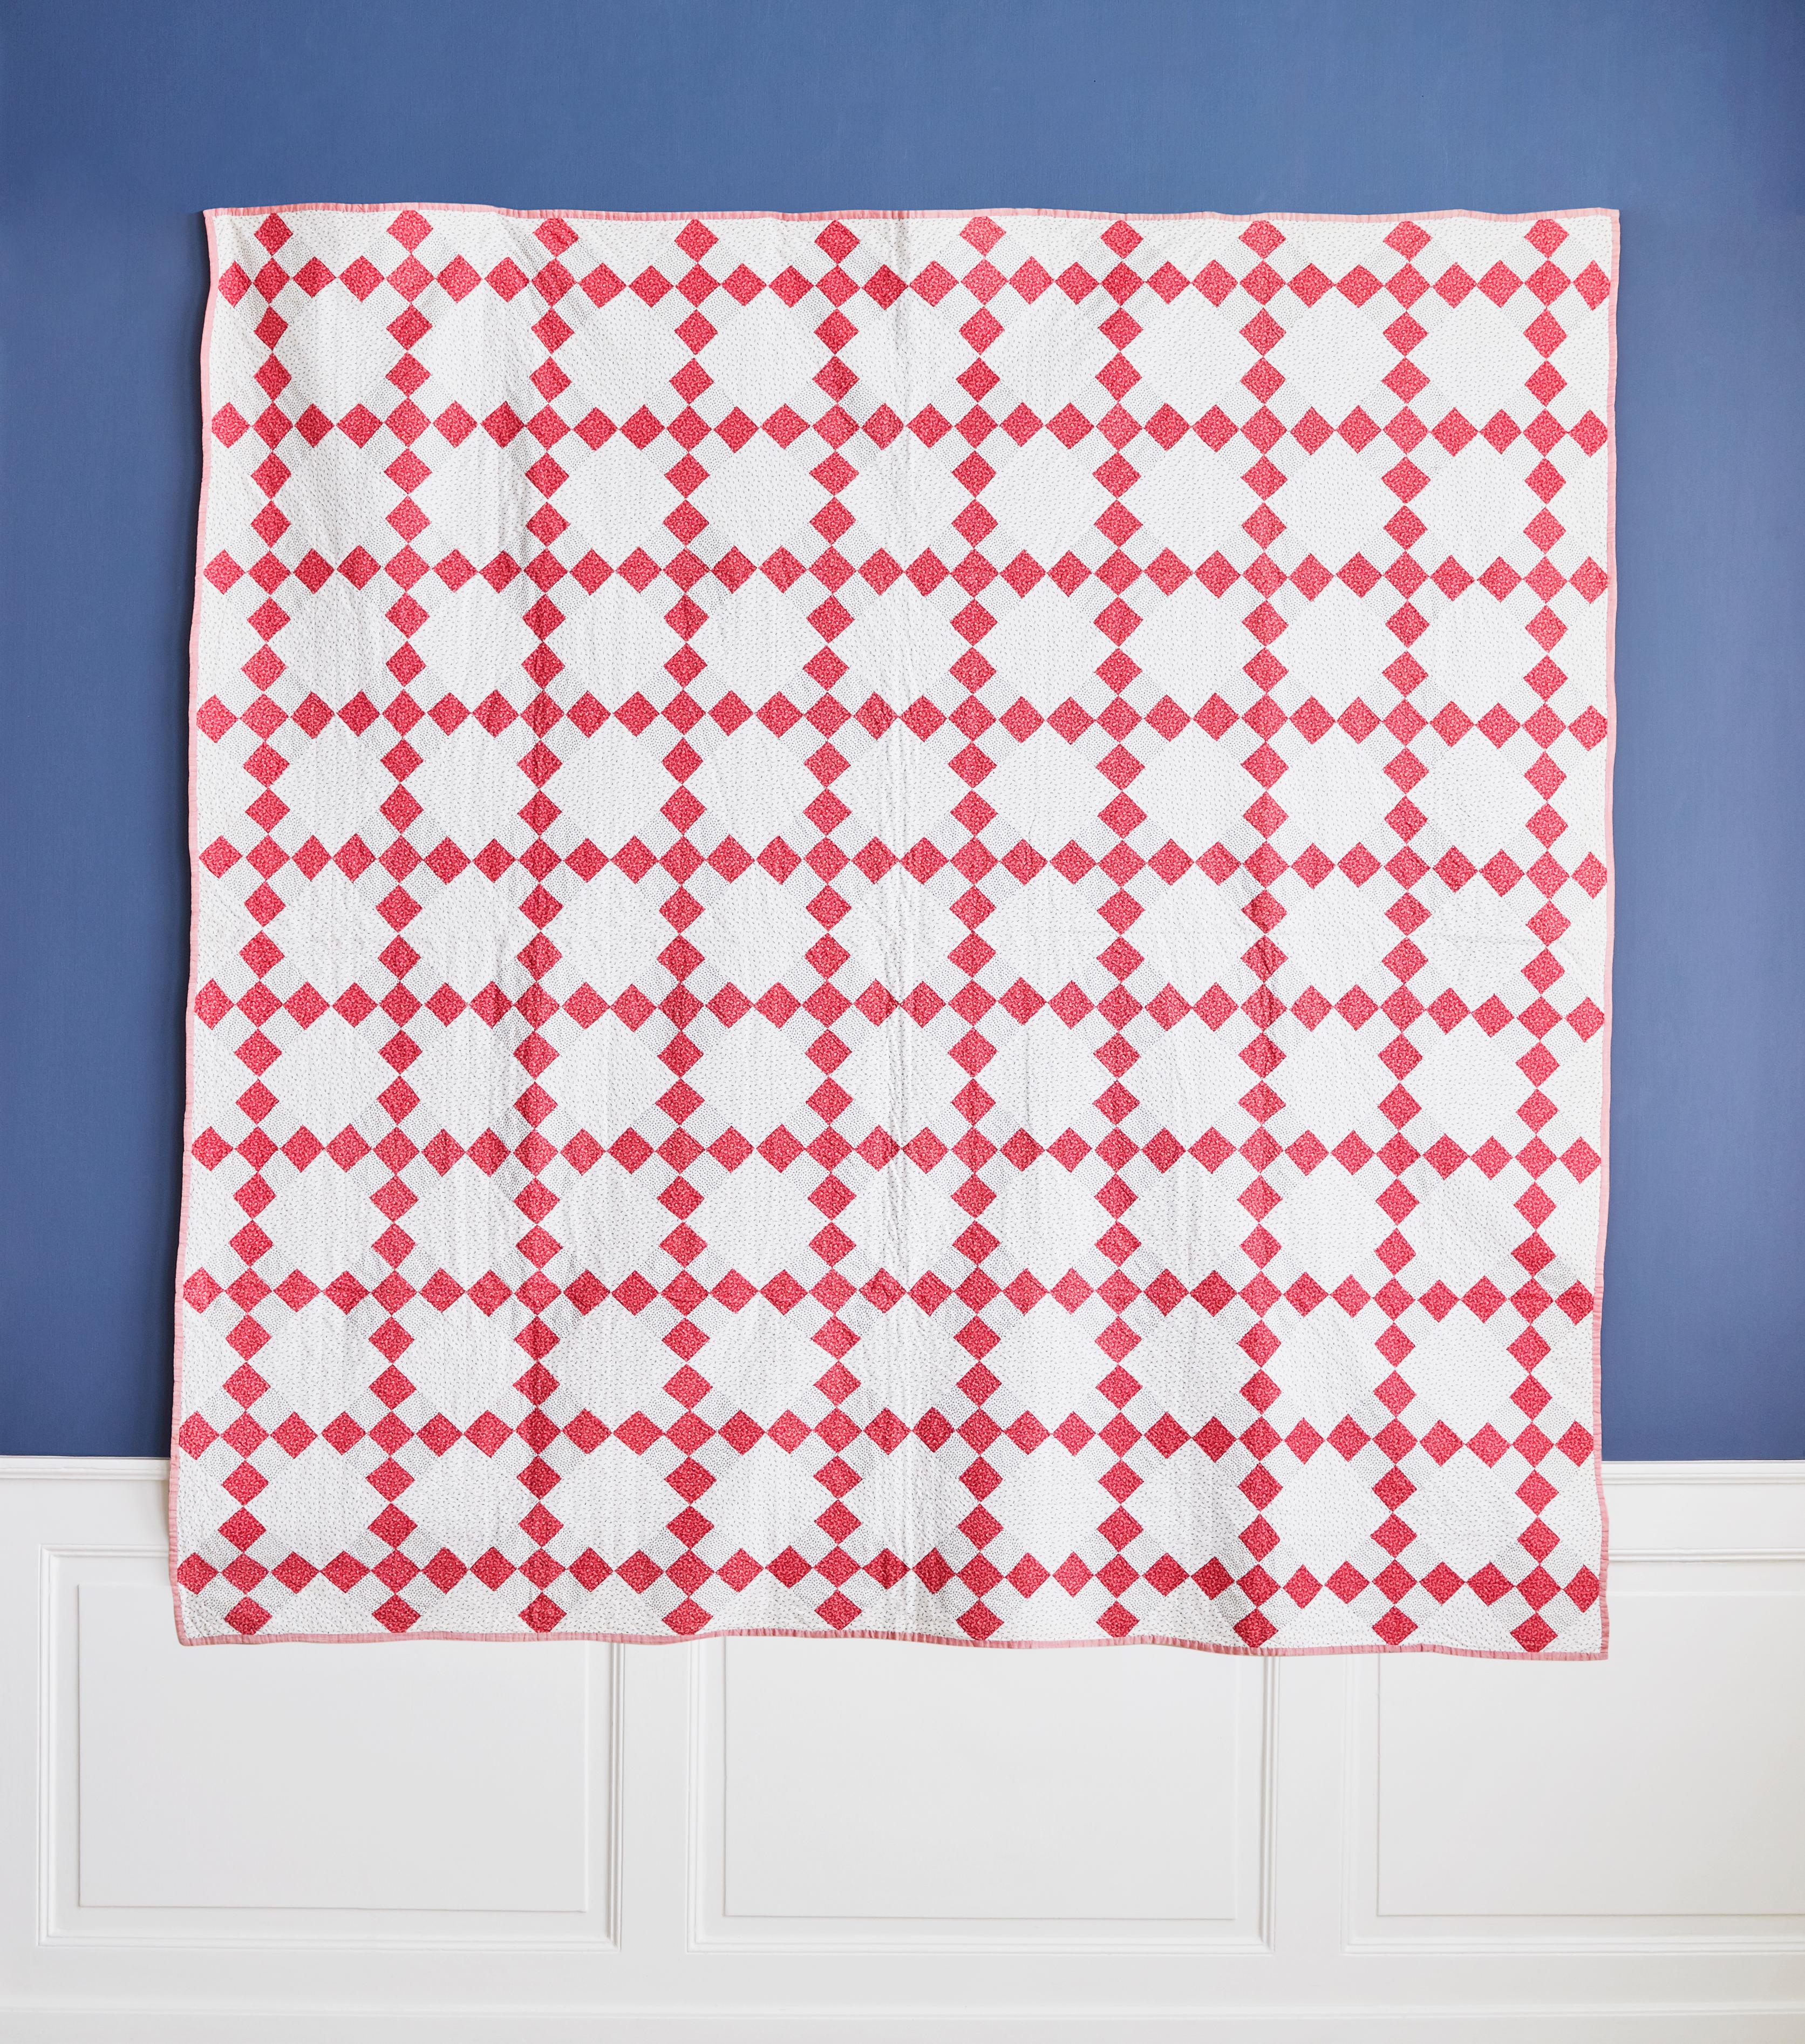 USA, vintage

Red and white “Nine patch” patchwork quilt.

Measures: H 189 x W 184 cm.
 